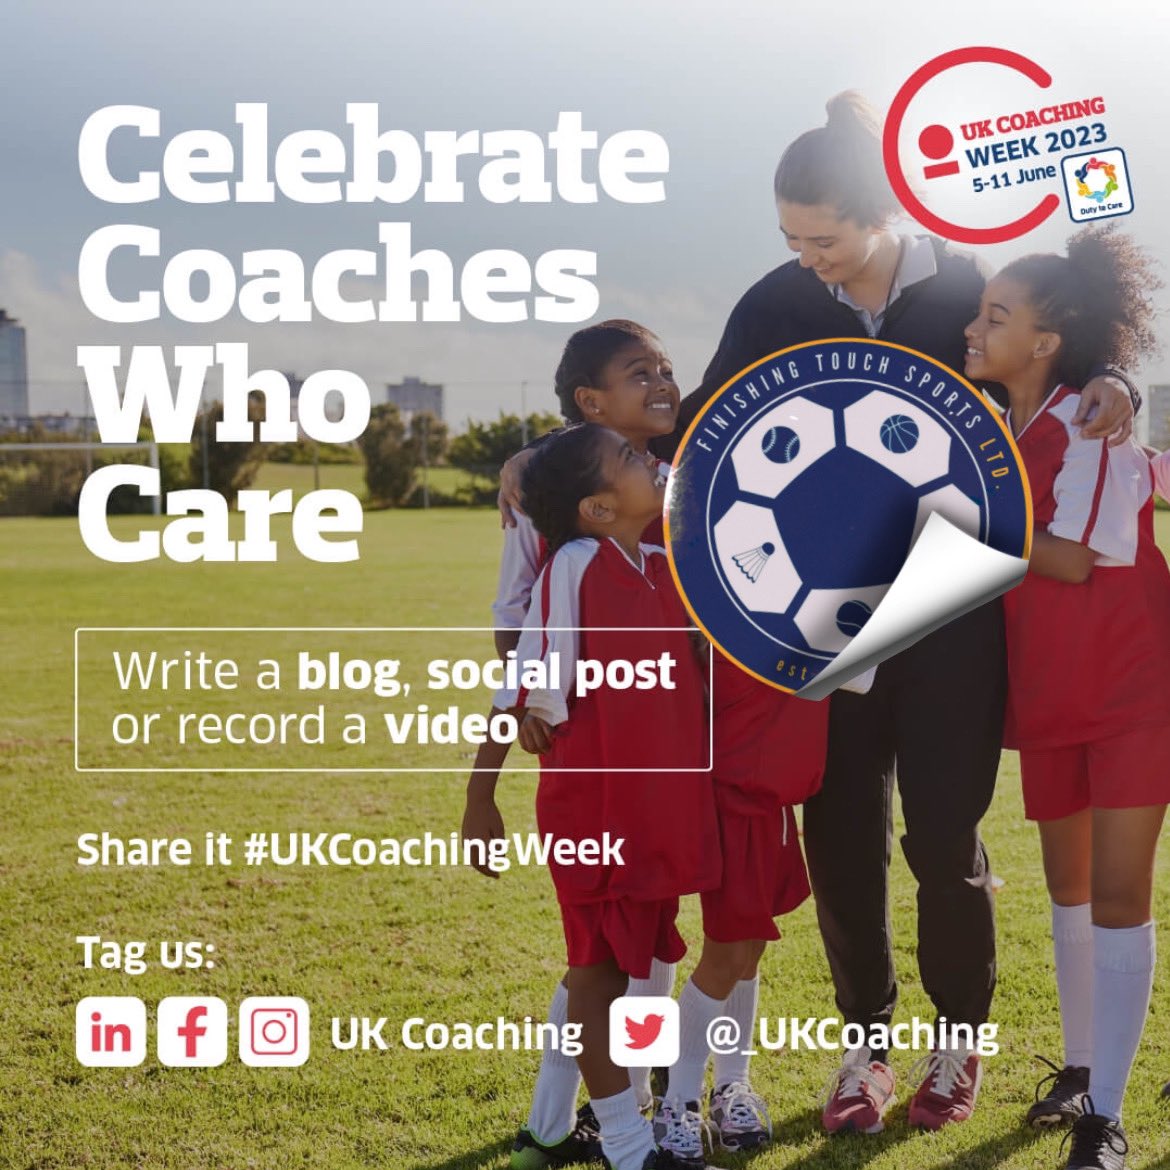 Taking a moment to reflect and celebrate my amazing and inspiring team of coaches, this #UKCoachingWeek! 

Thank you all for making our active provisions so engaging, enthusiastic and enjoyable for our youth community! 👏💙

C. Lumsdon
Owner & Director

(@_UKCoaching)